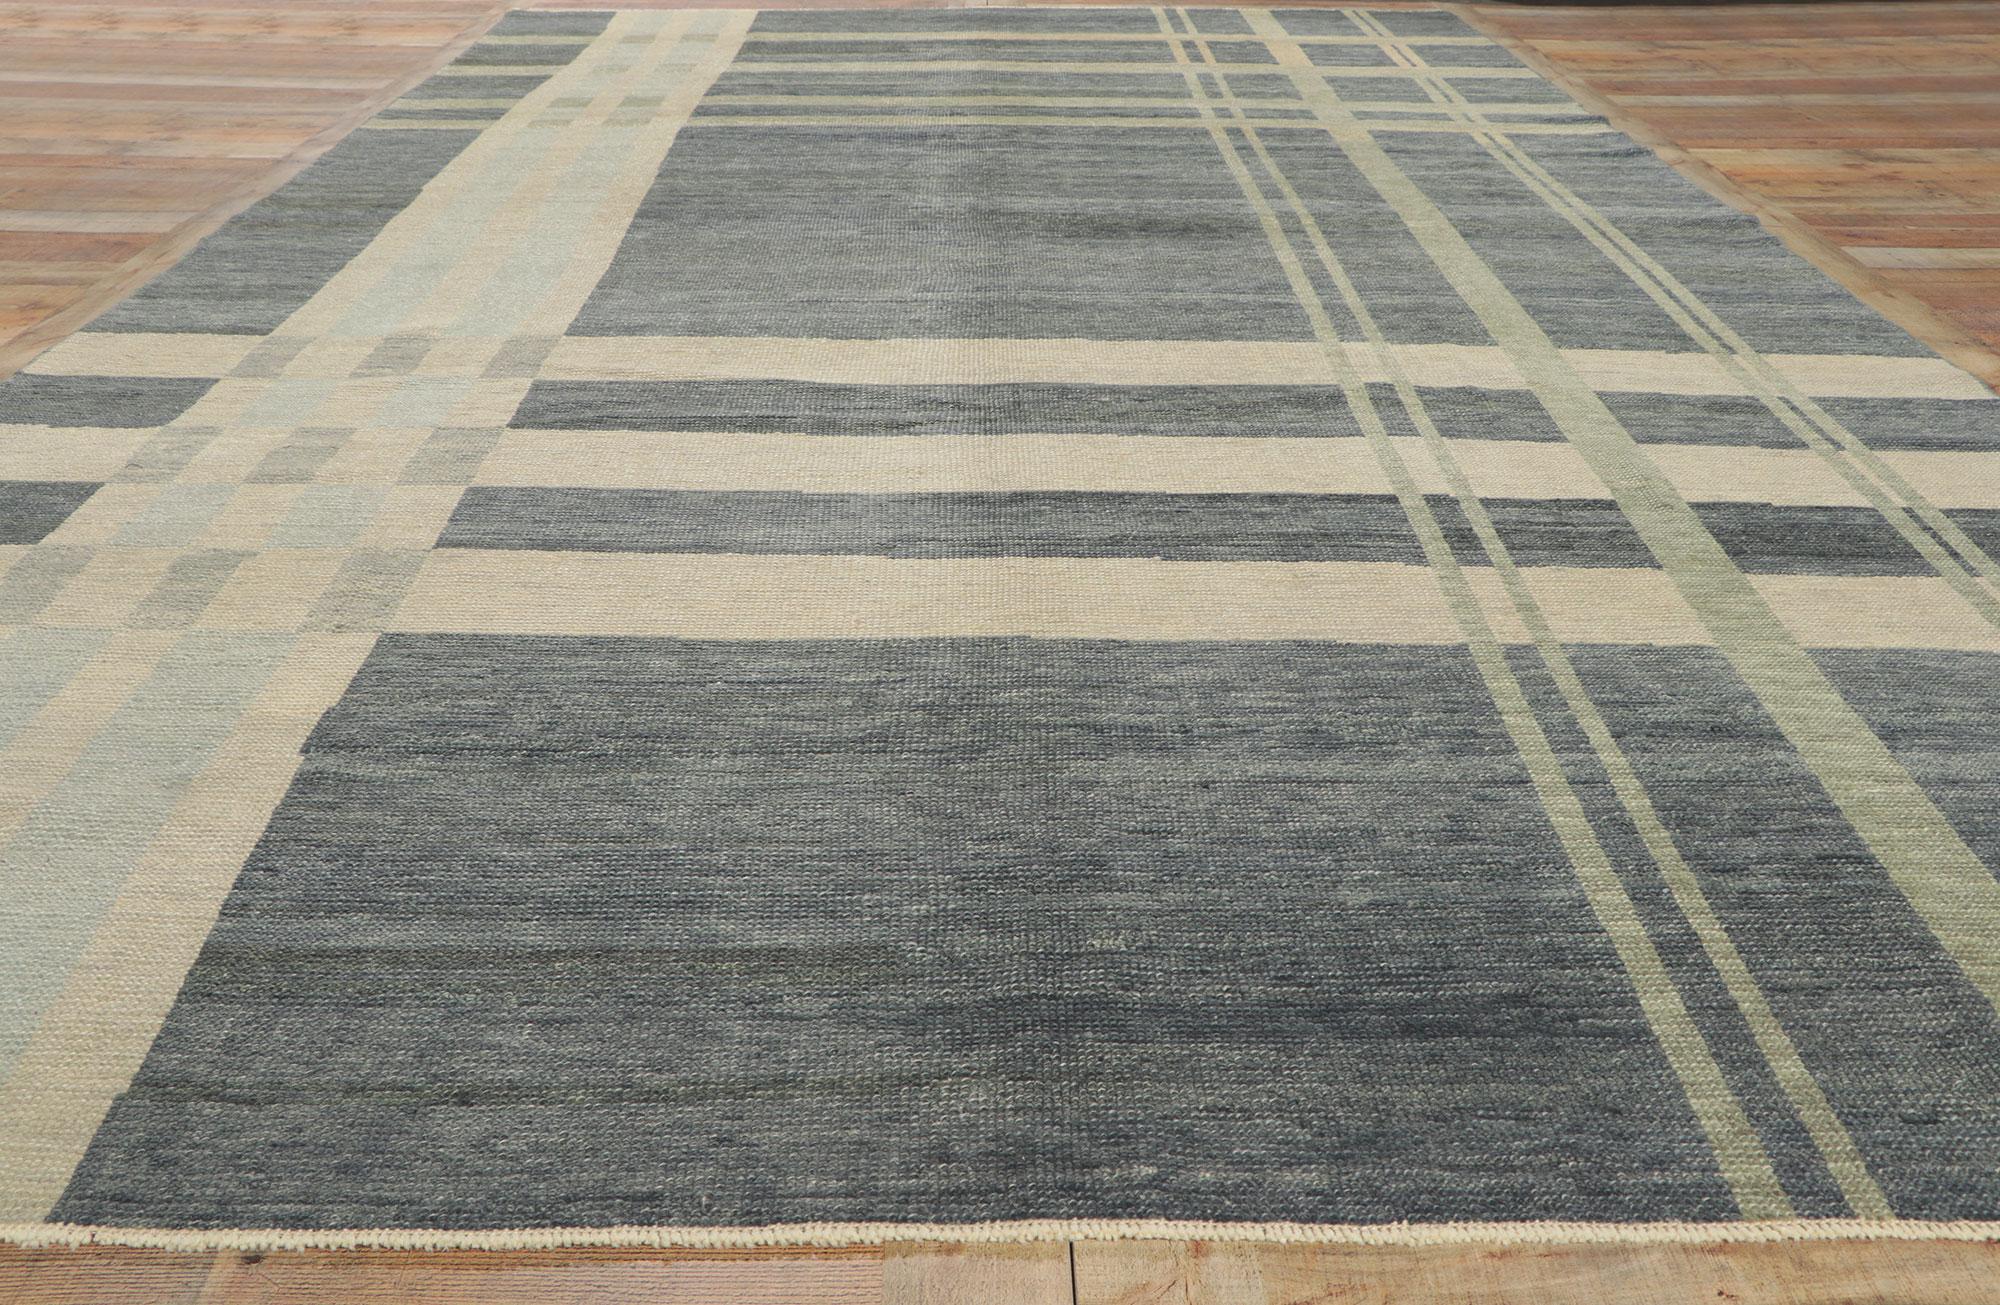 Wool New Modern Plaid Tartan Rug with Ivy League Style For Sale